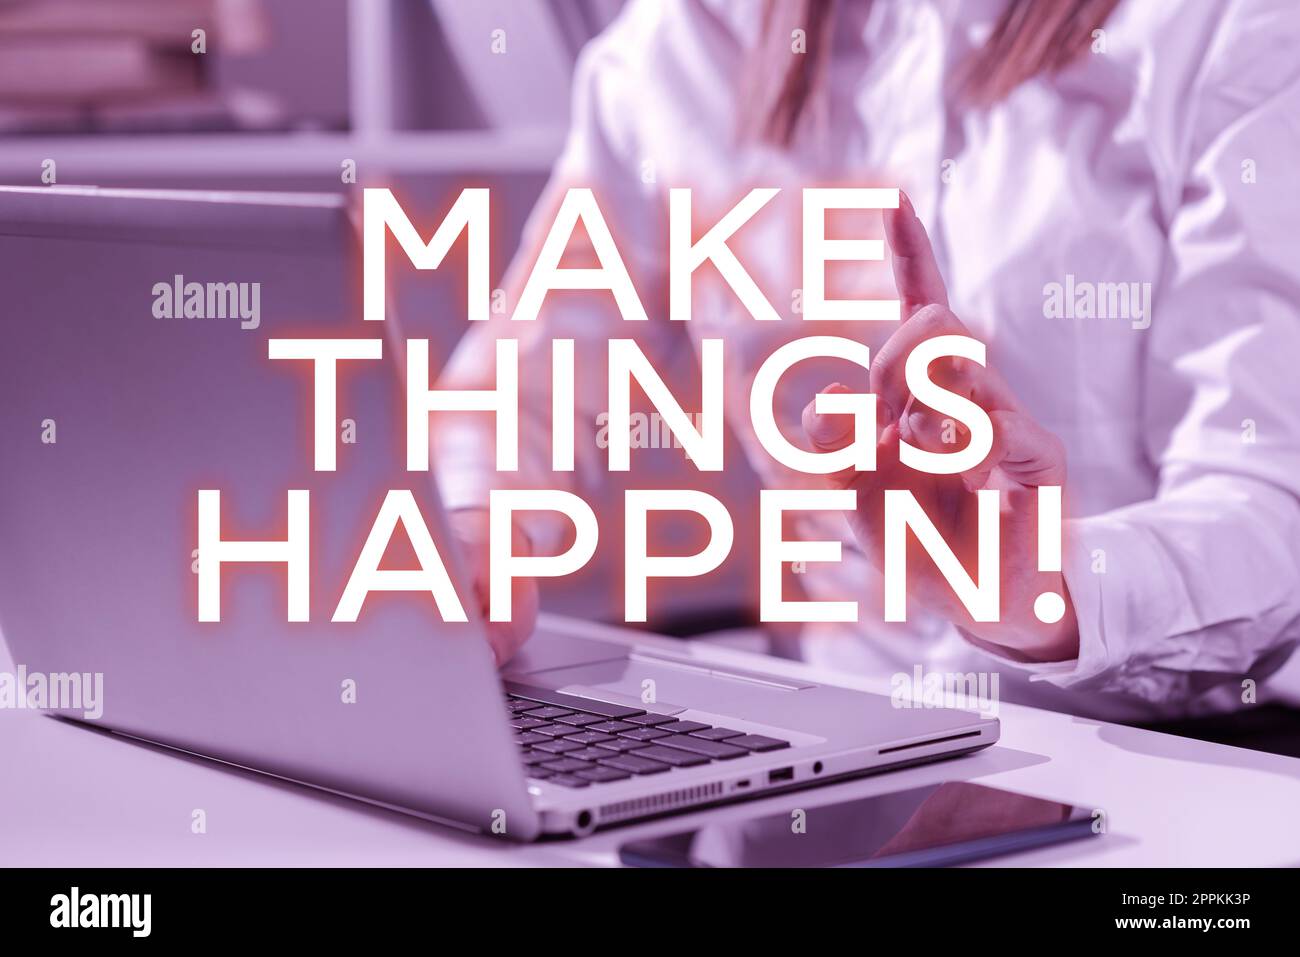 Handwriting text Make Things Happen. Business concept inspiration and motivation more efforts to achieve success Stock Photo